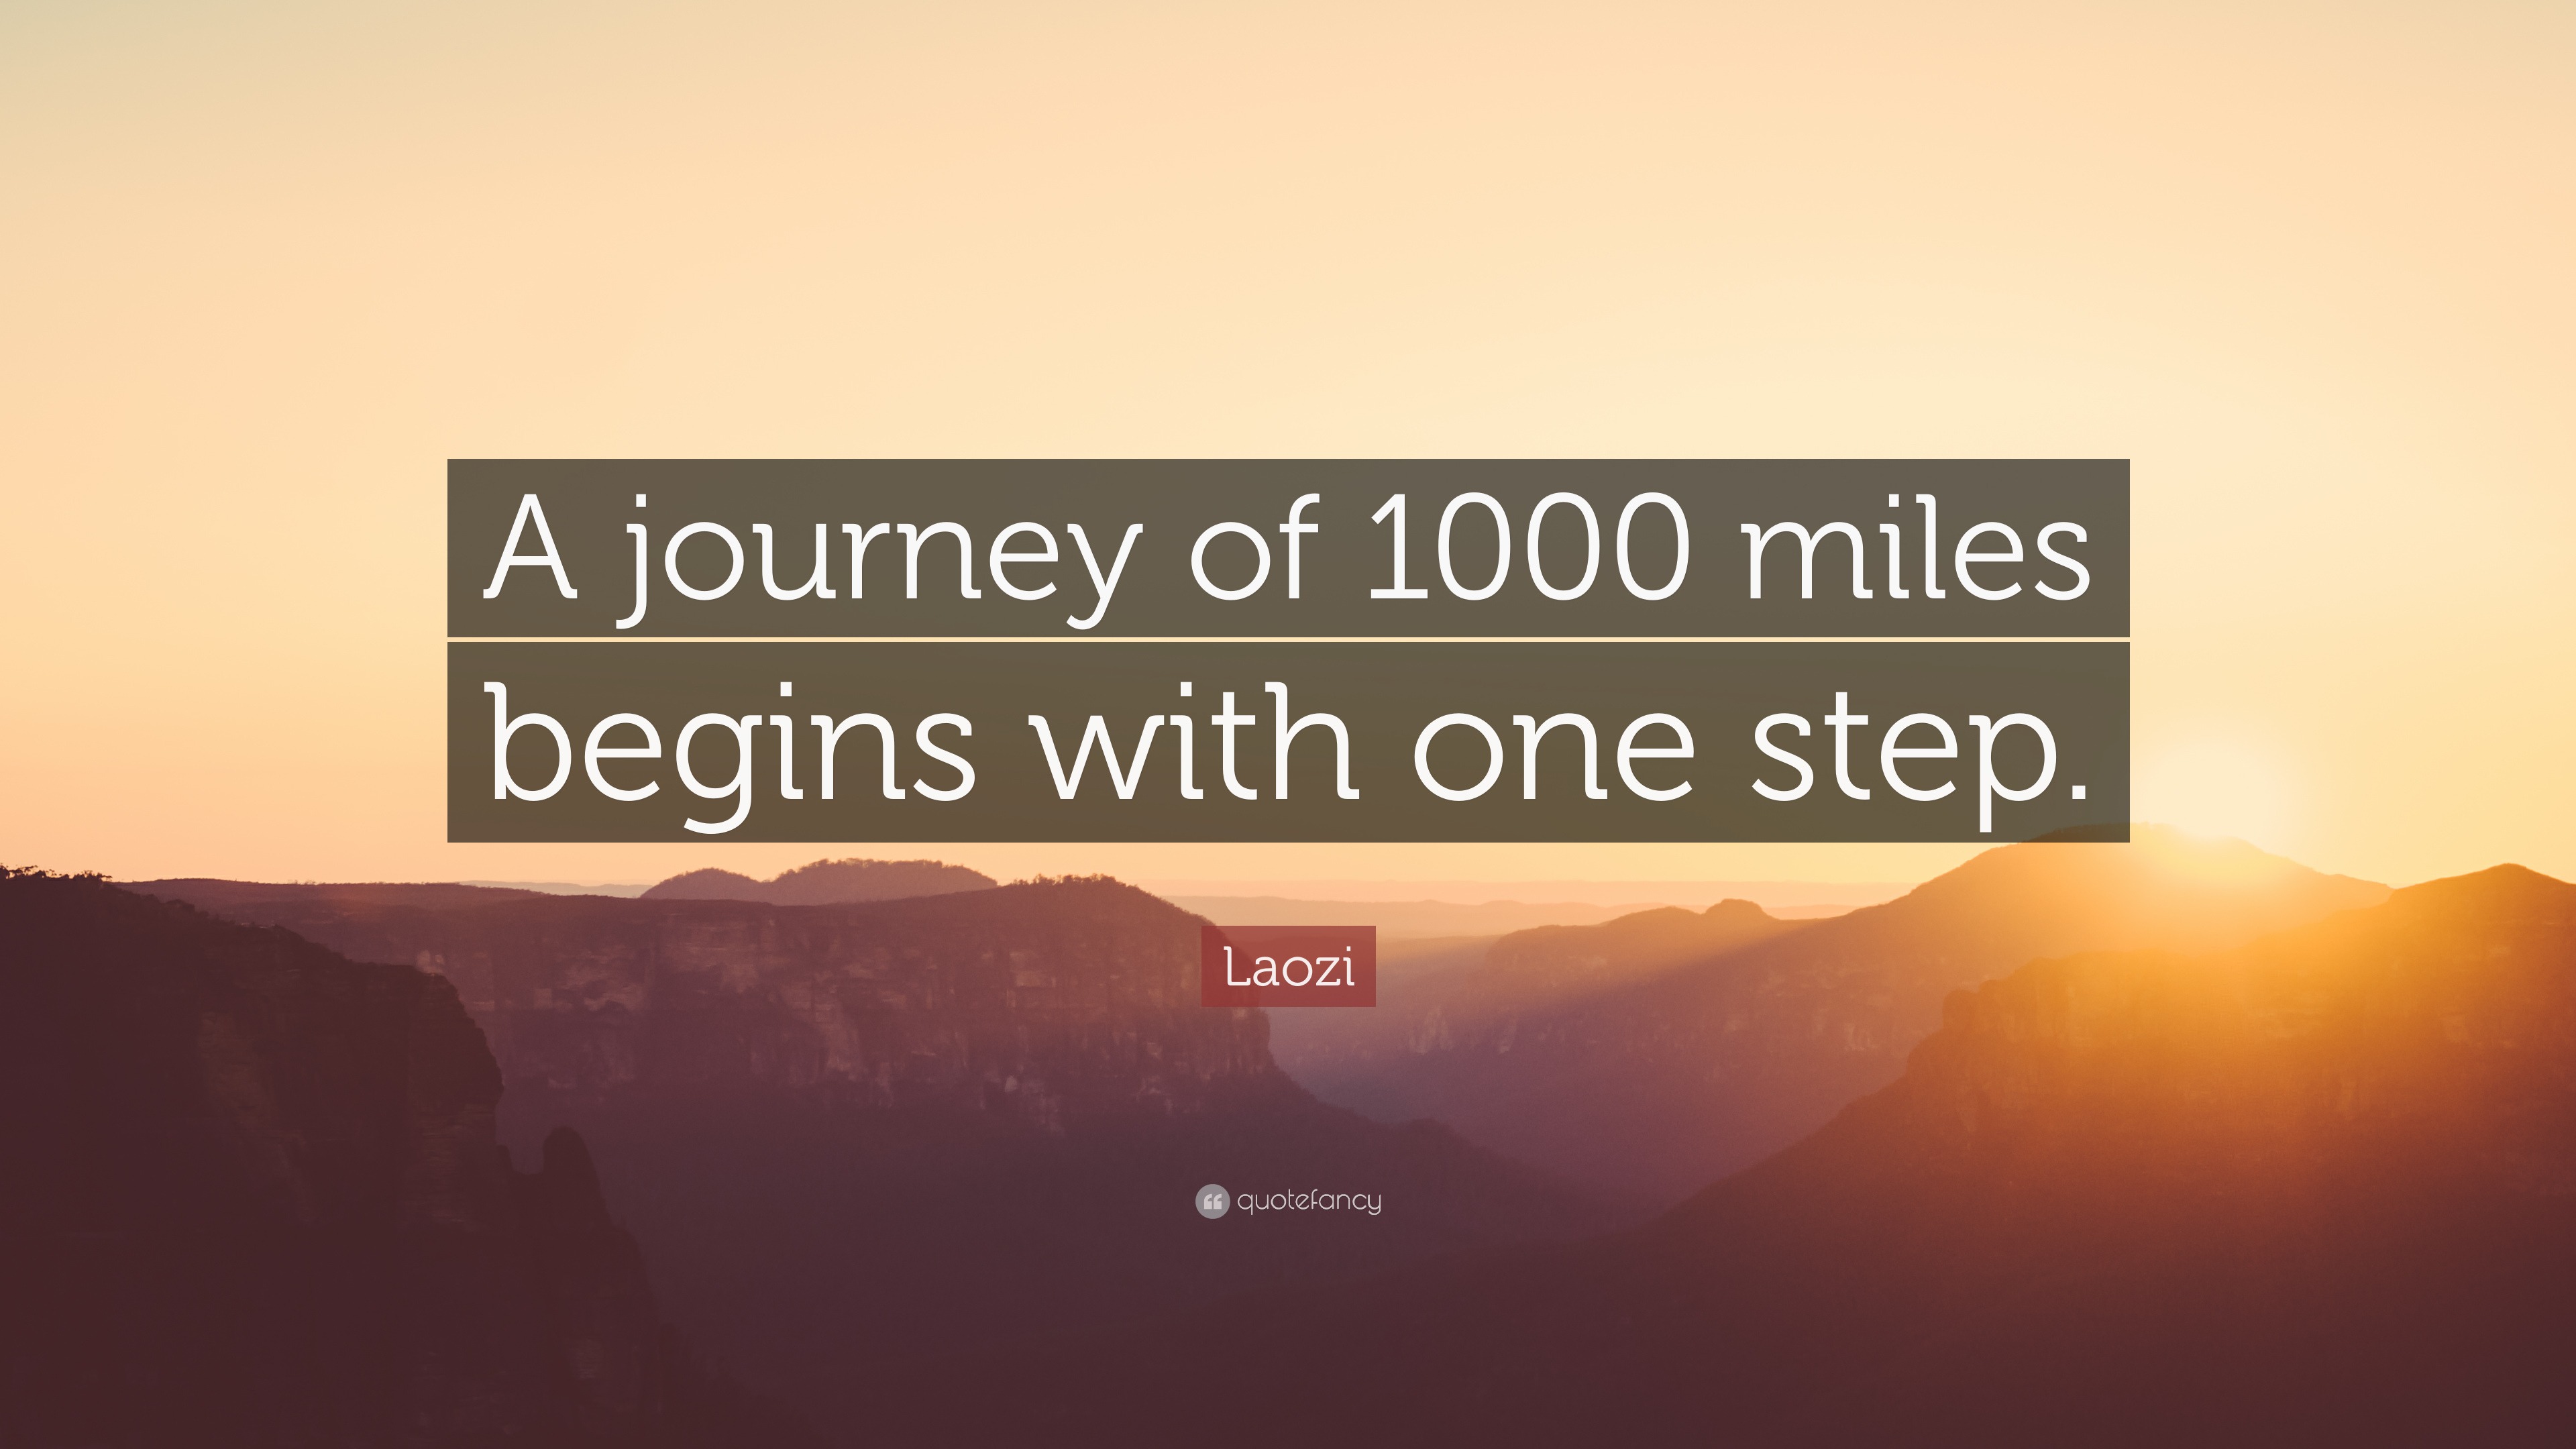 Laozi Quote: “A journey of 1000 miles begins with one step.”